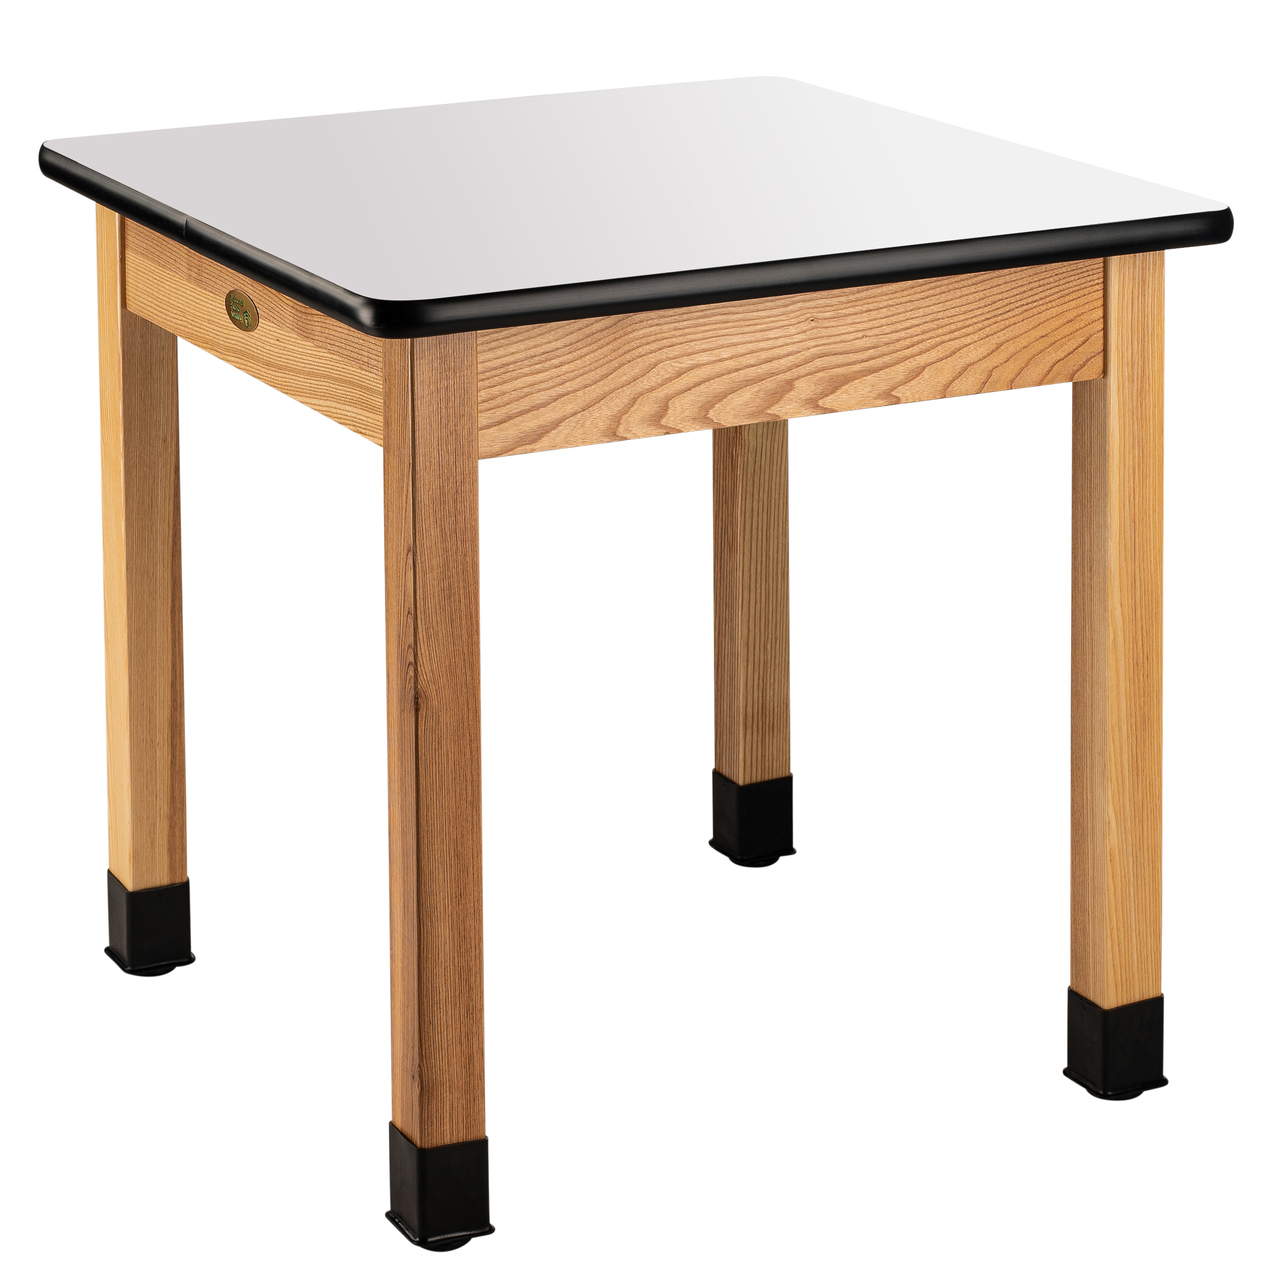 NPS Wood Science Lab Table -  30"x30"x36" -  Whiteboard Top - Black Top and Ash Leg